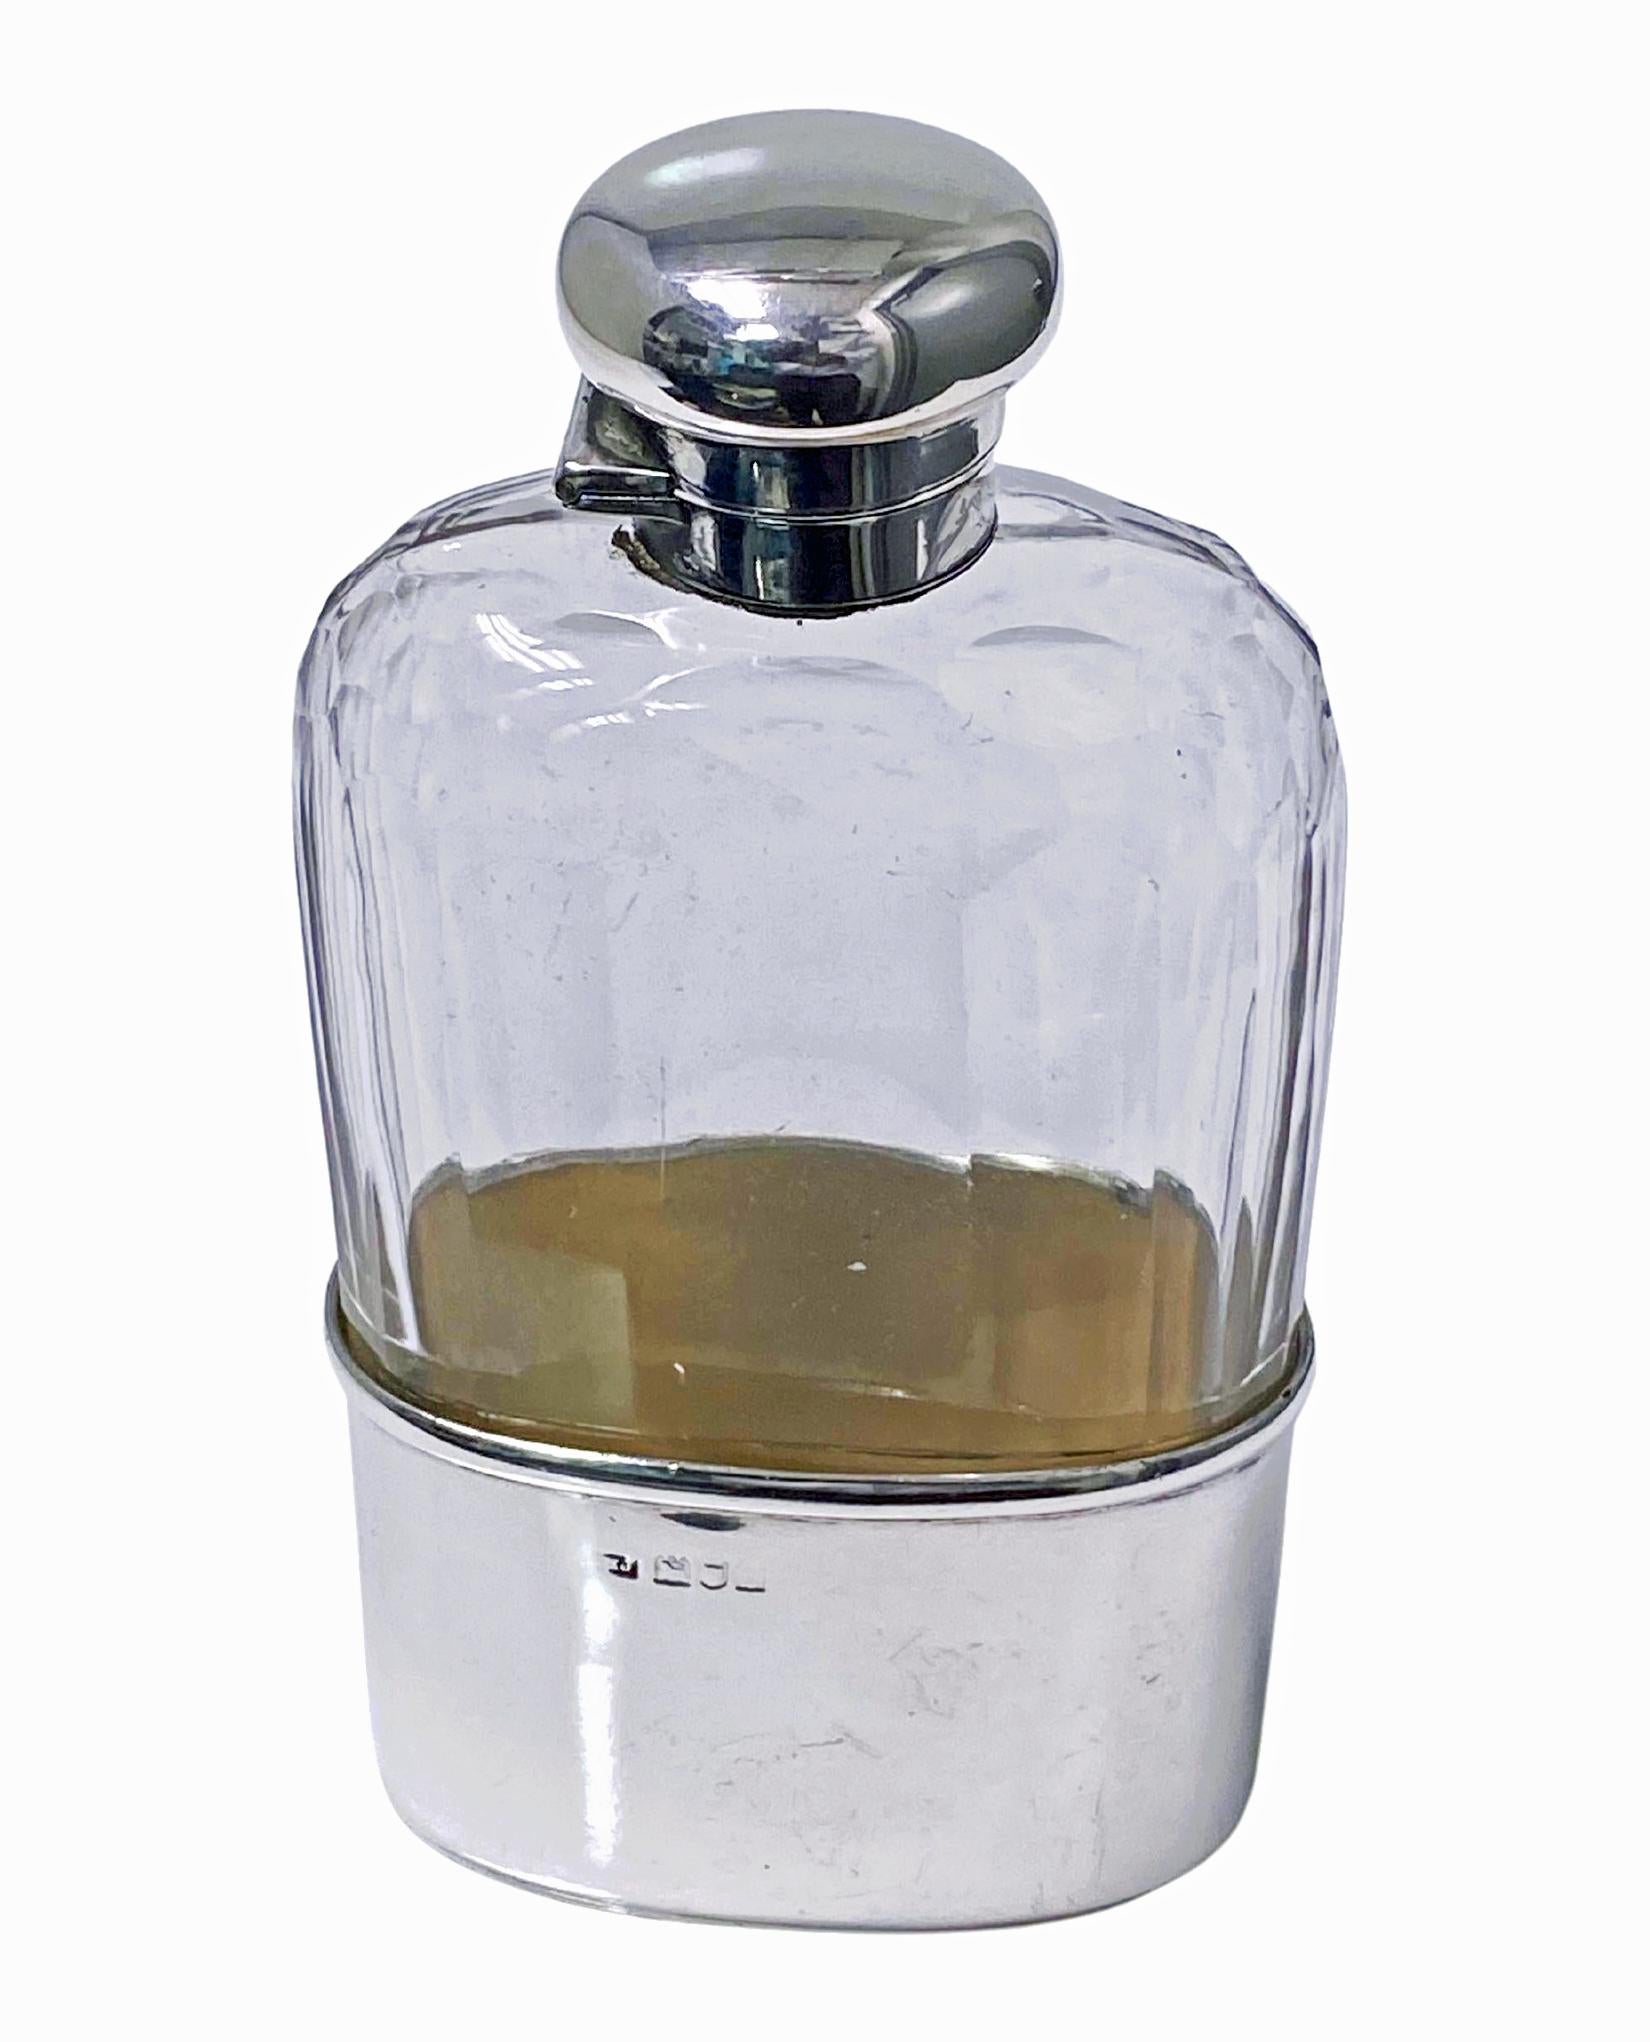 Antique English Silver hip flask, London 1906, George  Henry James. The flask with lower silver detachable cup, gilded interior, upper faceted panel glass, silver bayonet top.  Measures: 5.50 x 3.0 x 1.25 inches. Good condition, no leaks.